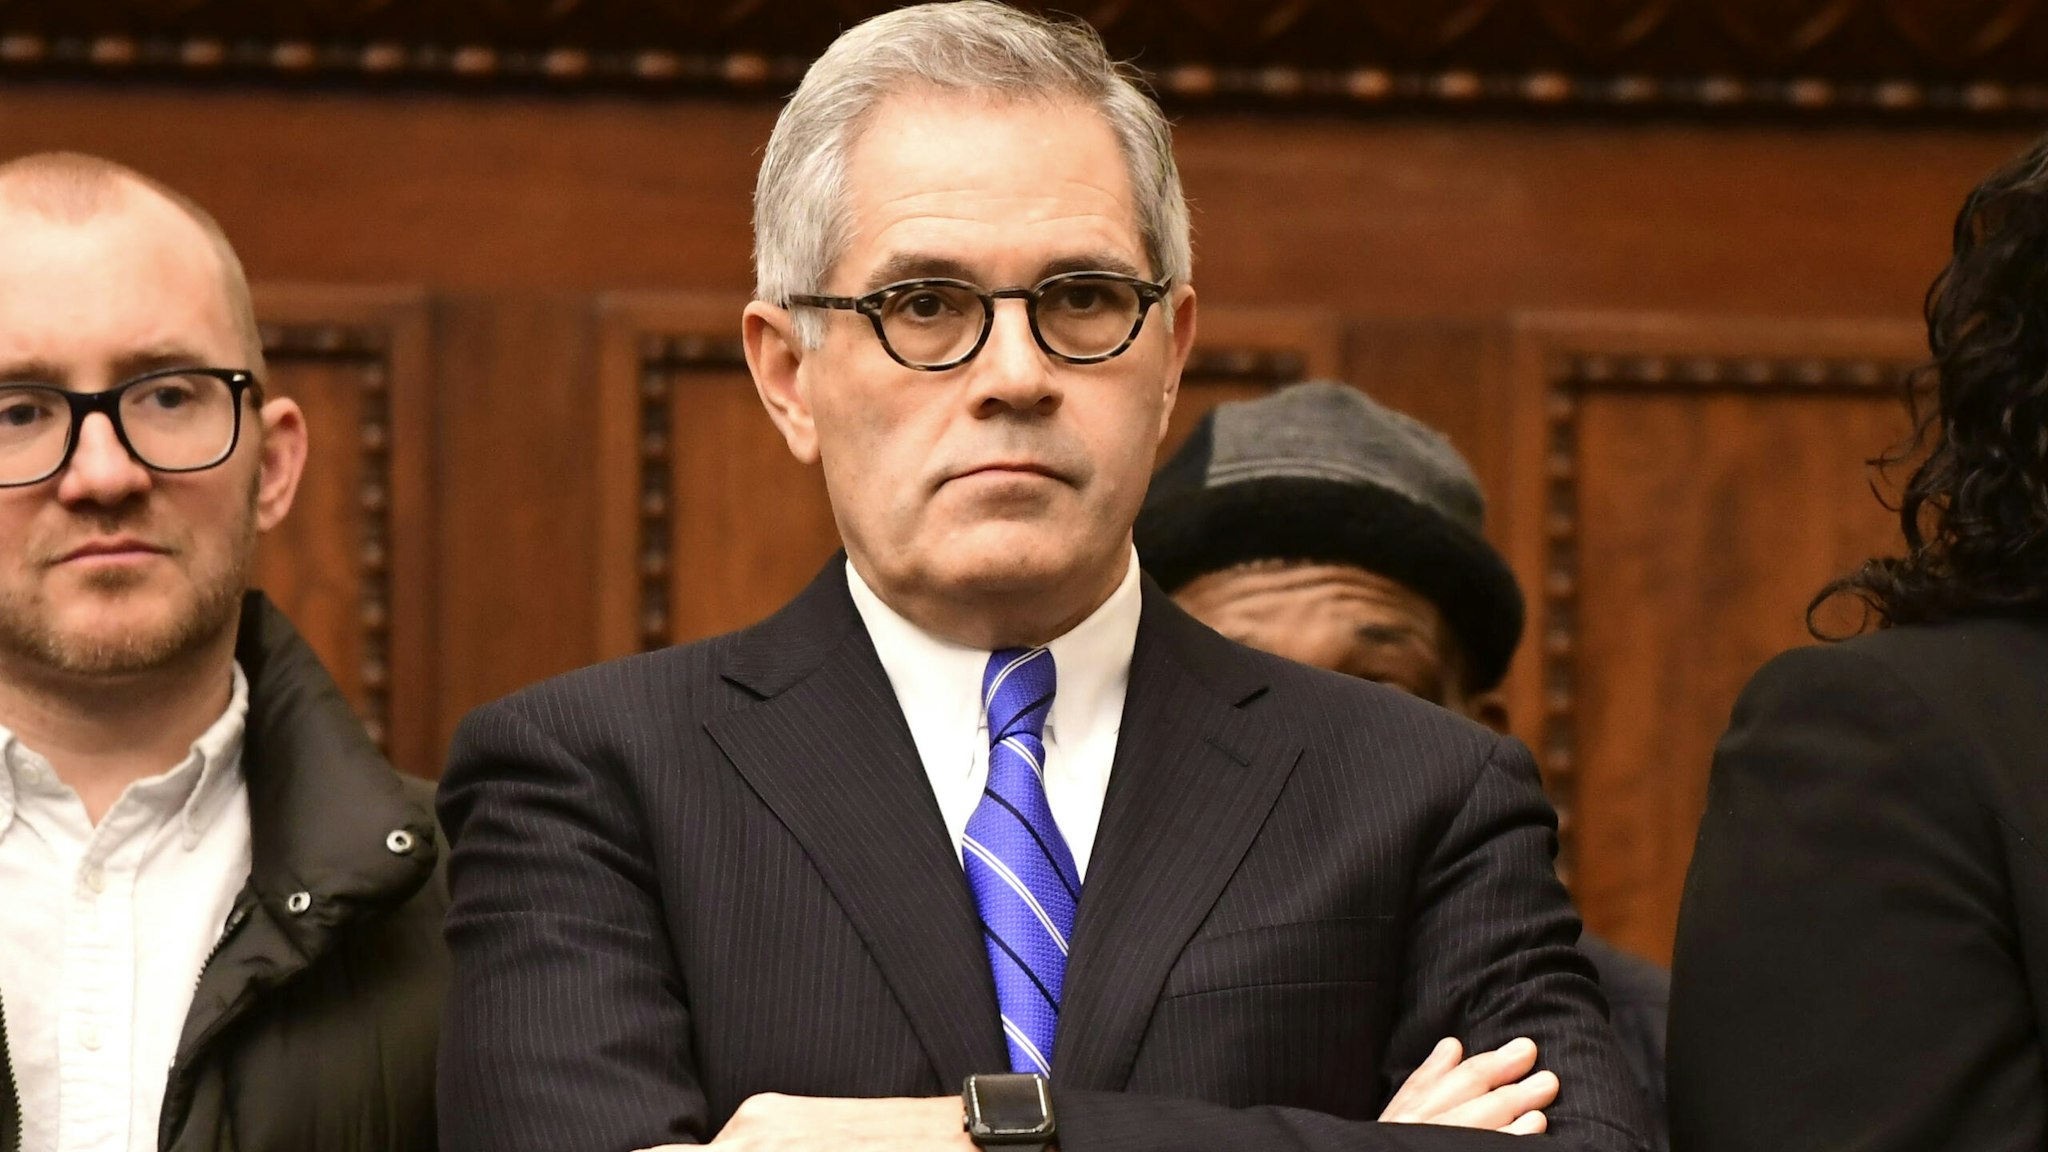 Philadelphia District Attorney Larry Krasner listens during a press conference announcing Danielle Outlaw as the new Police Commissioner on December 30, 2019 in Philadelphia, Pennsylvania. Outlaw, Philadelphia's first black female police commissioner, was previously the police chief in Portland, OR.